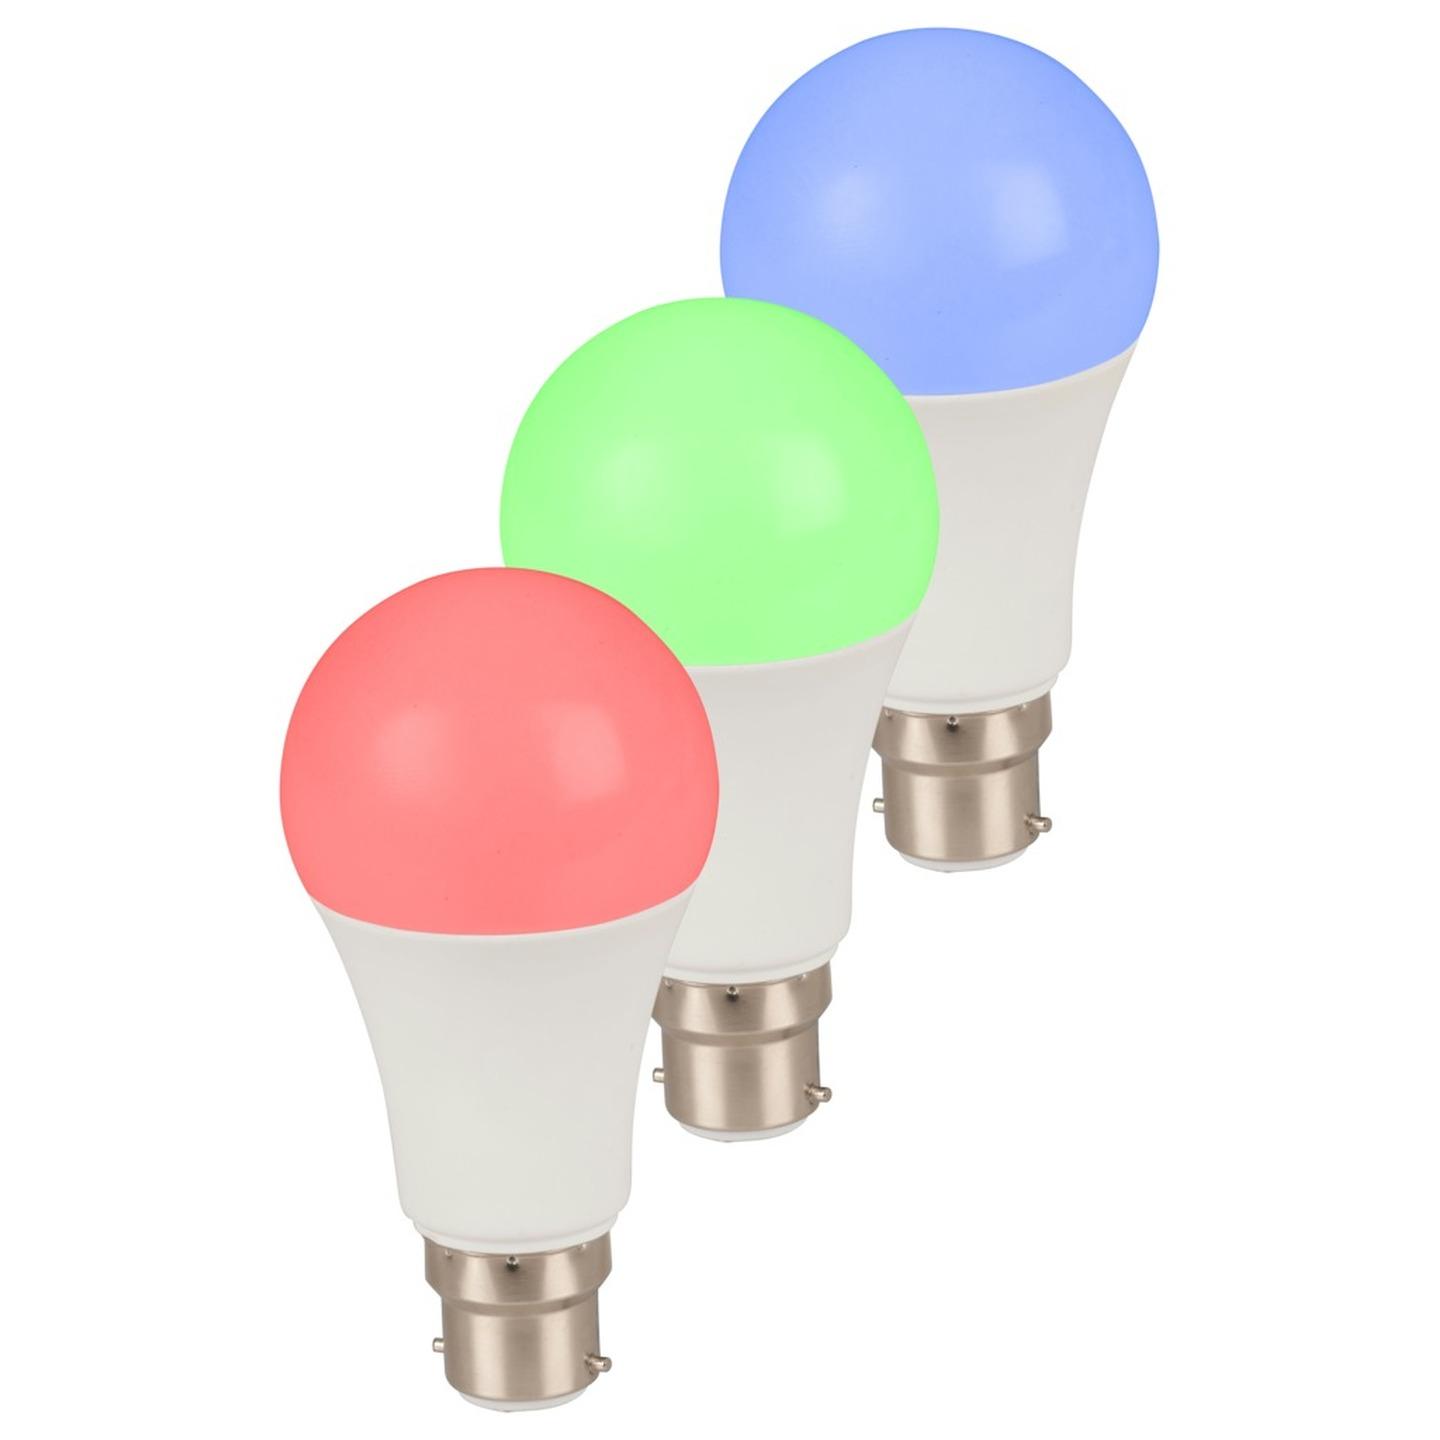 Smart Wi-Fi LED Bulb with Colour Change with Bayonet Light Fitting Pack of 3